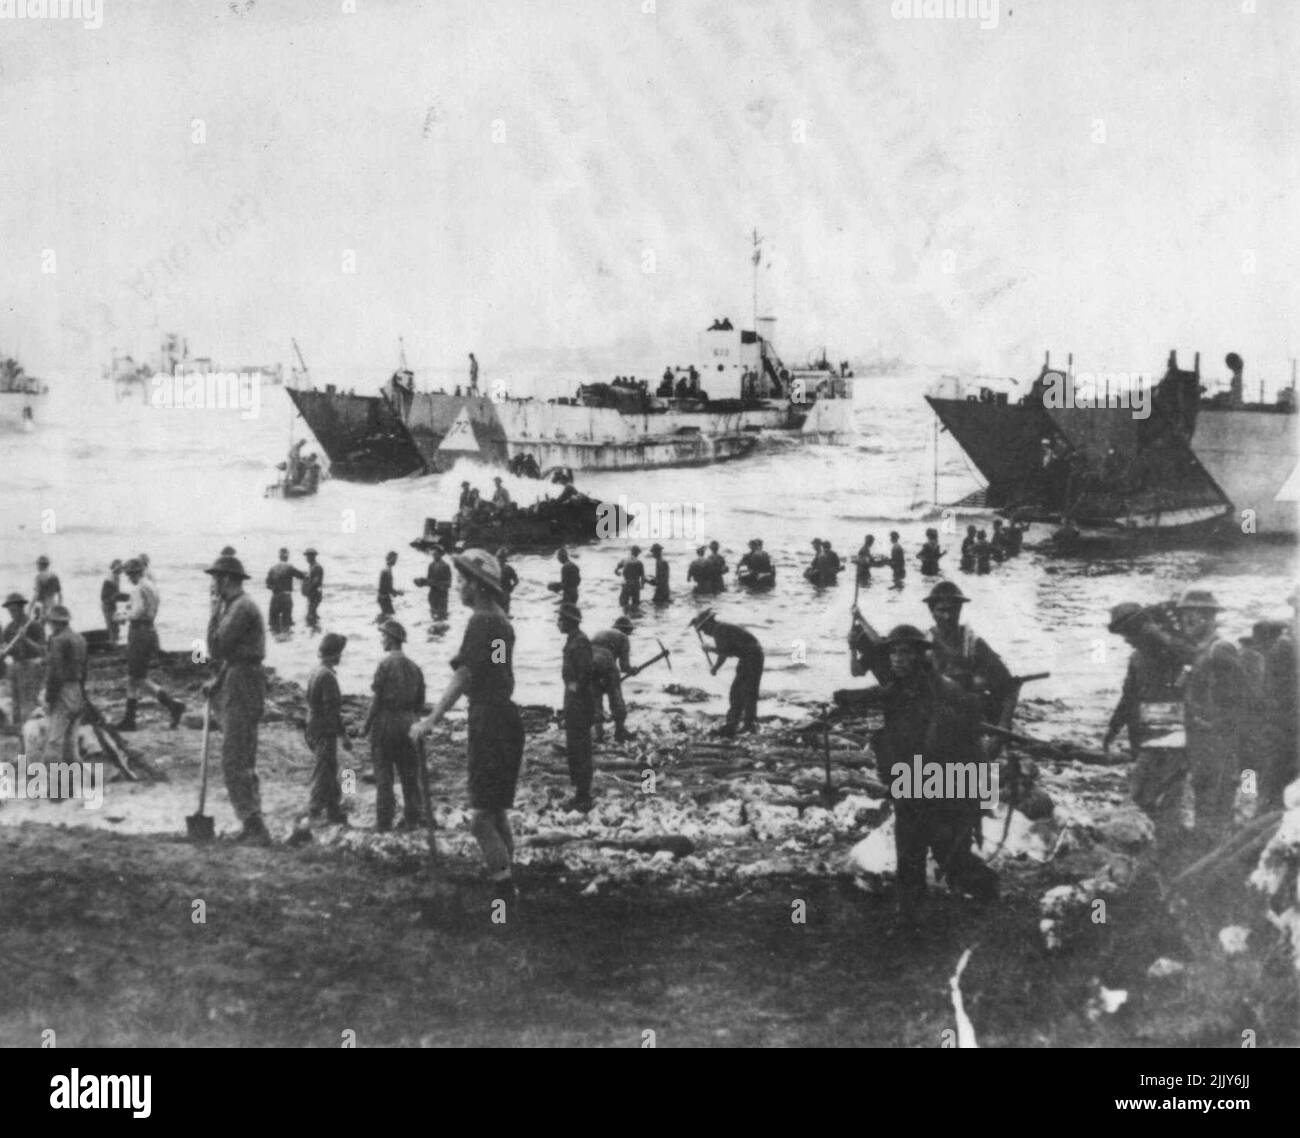 Unloading Stores At Sicily -- Allied soldiers stand waist deep in water as they pass along stores from landing craft during the first day of the Sicilian invasion, July 10. In the foreground. This photo was taken just after dawn by an official British photograph. July 25, 1943. (Photo by Associated Press Photo). Stock Photo